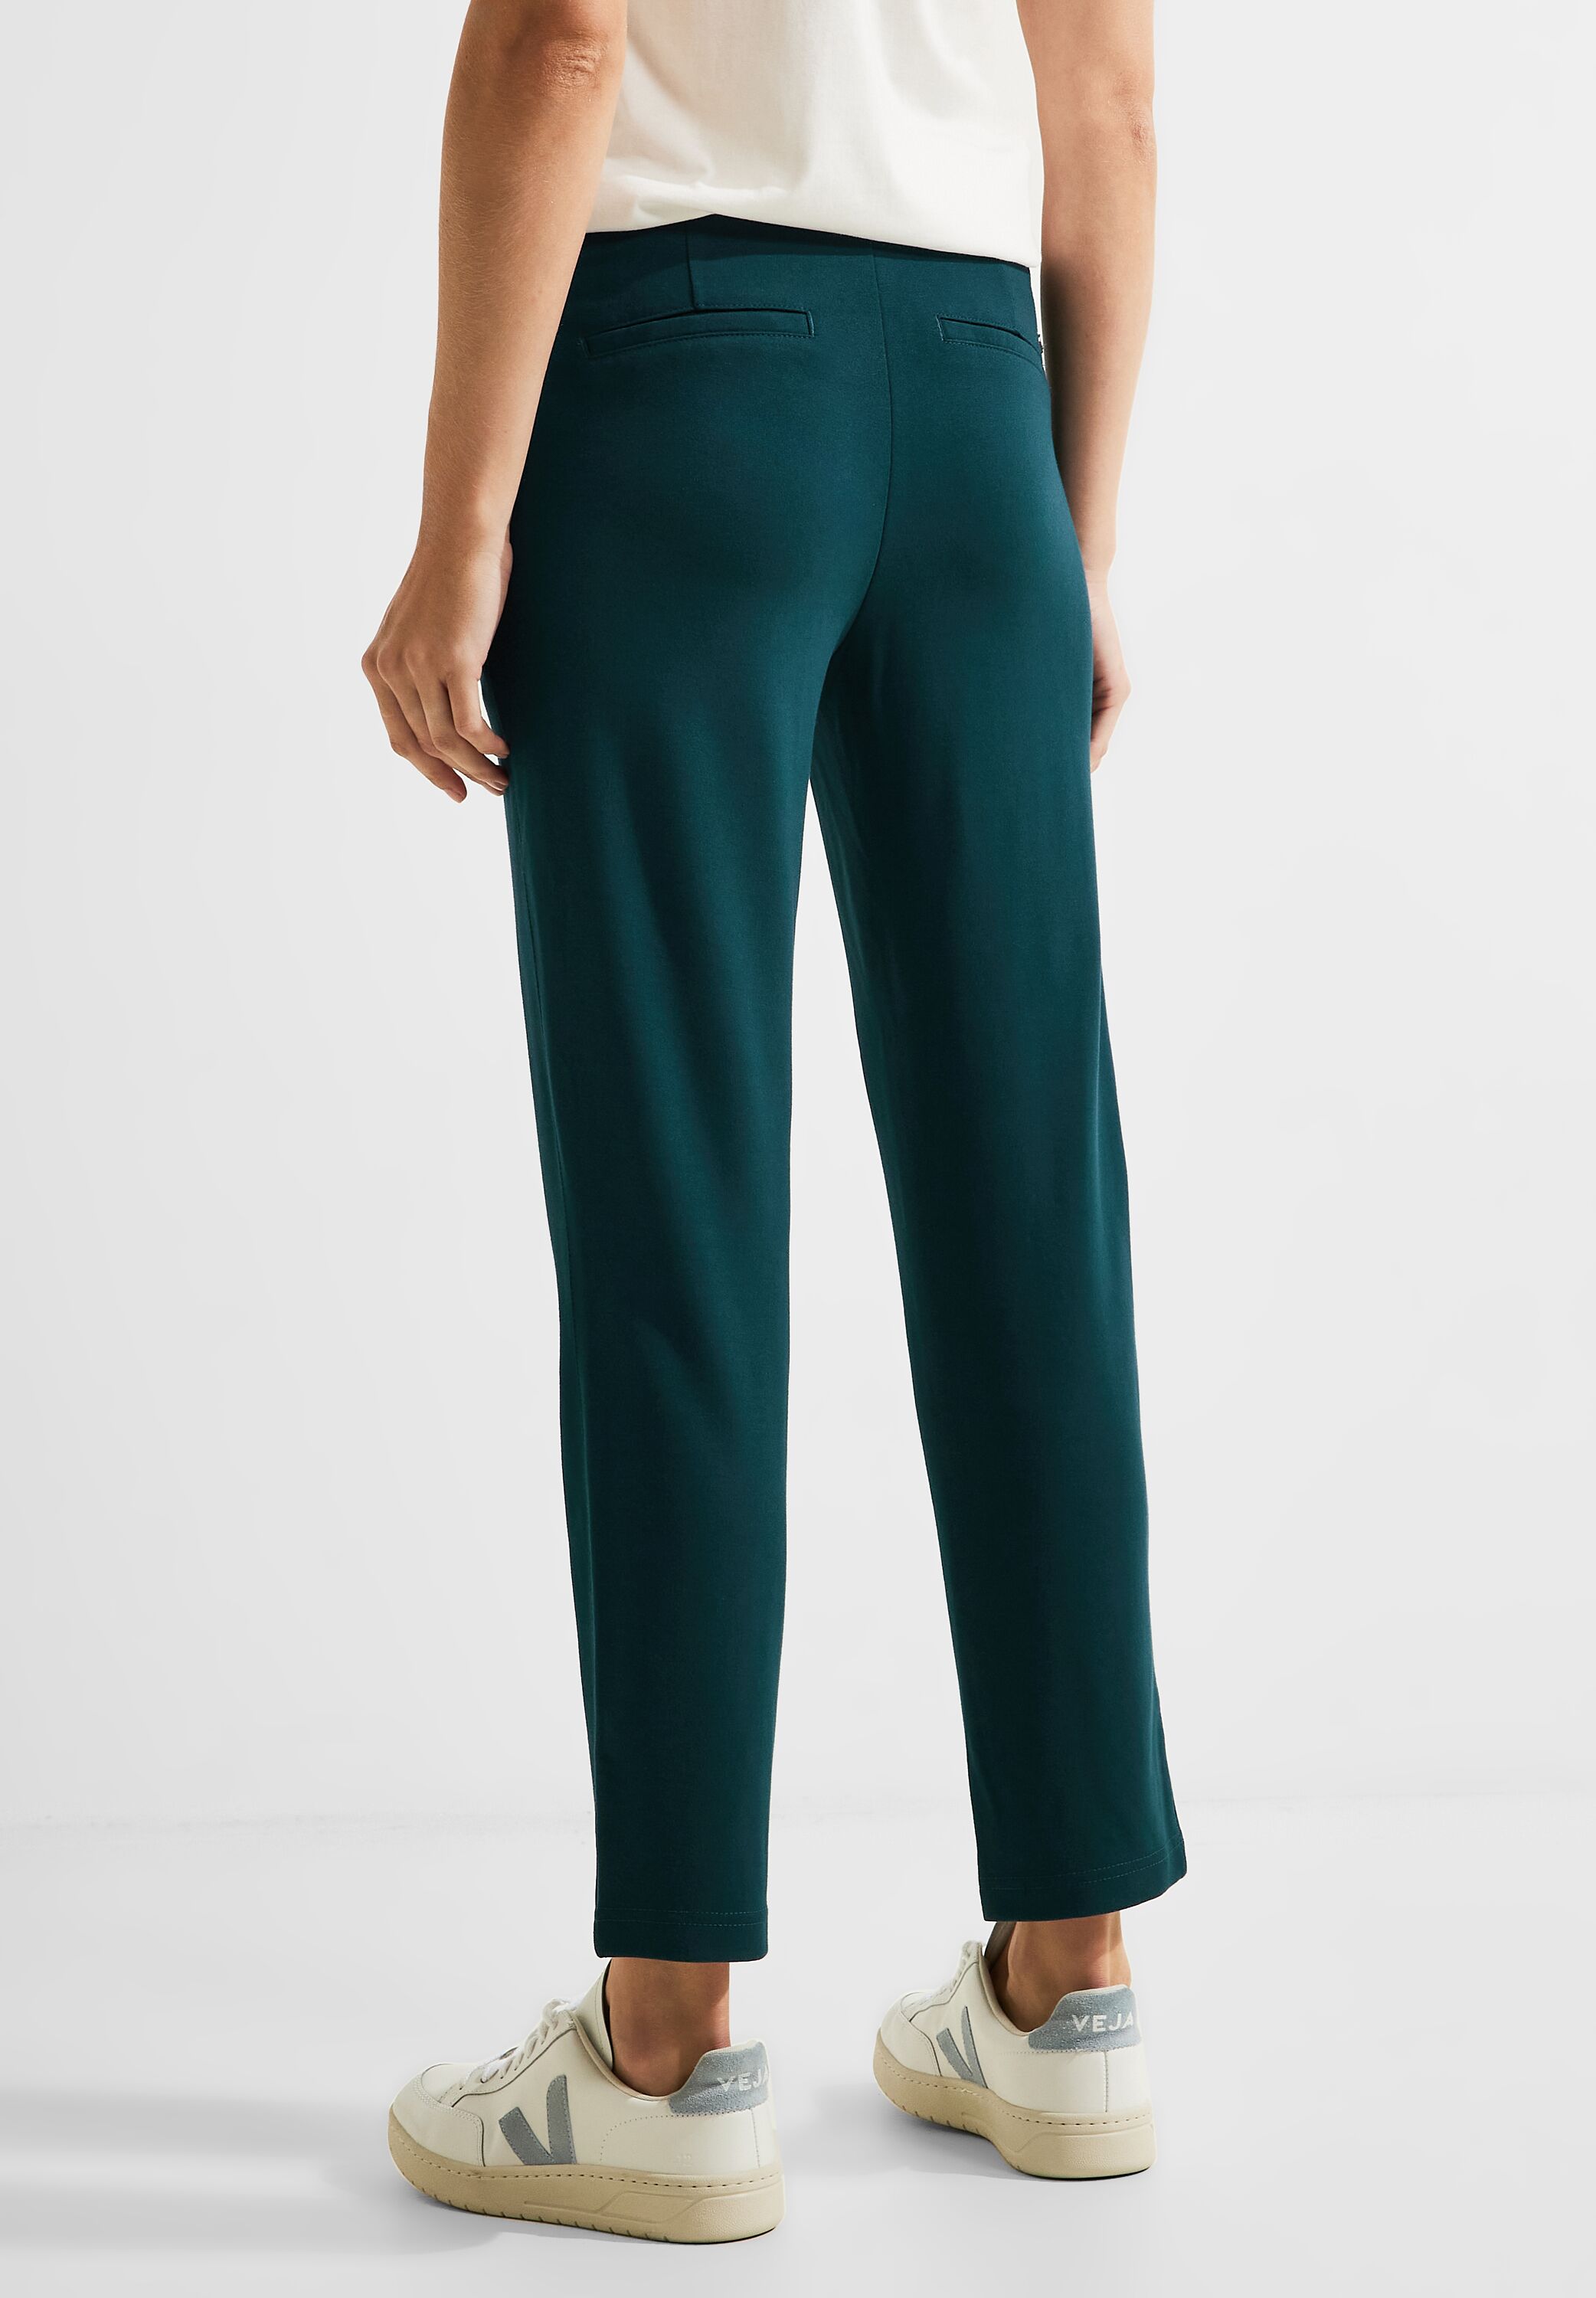 CECIL Joggpant Deep Mode Tracey - Green im SALE Lake B376689-14926 CONCEPT reduziert in